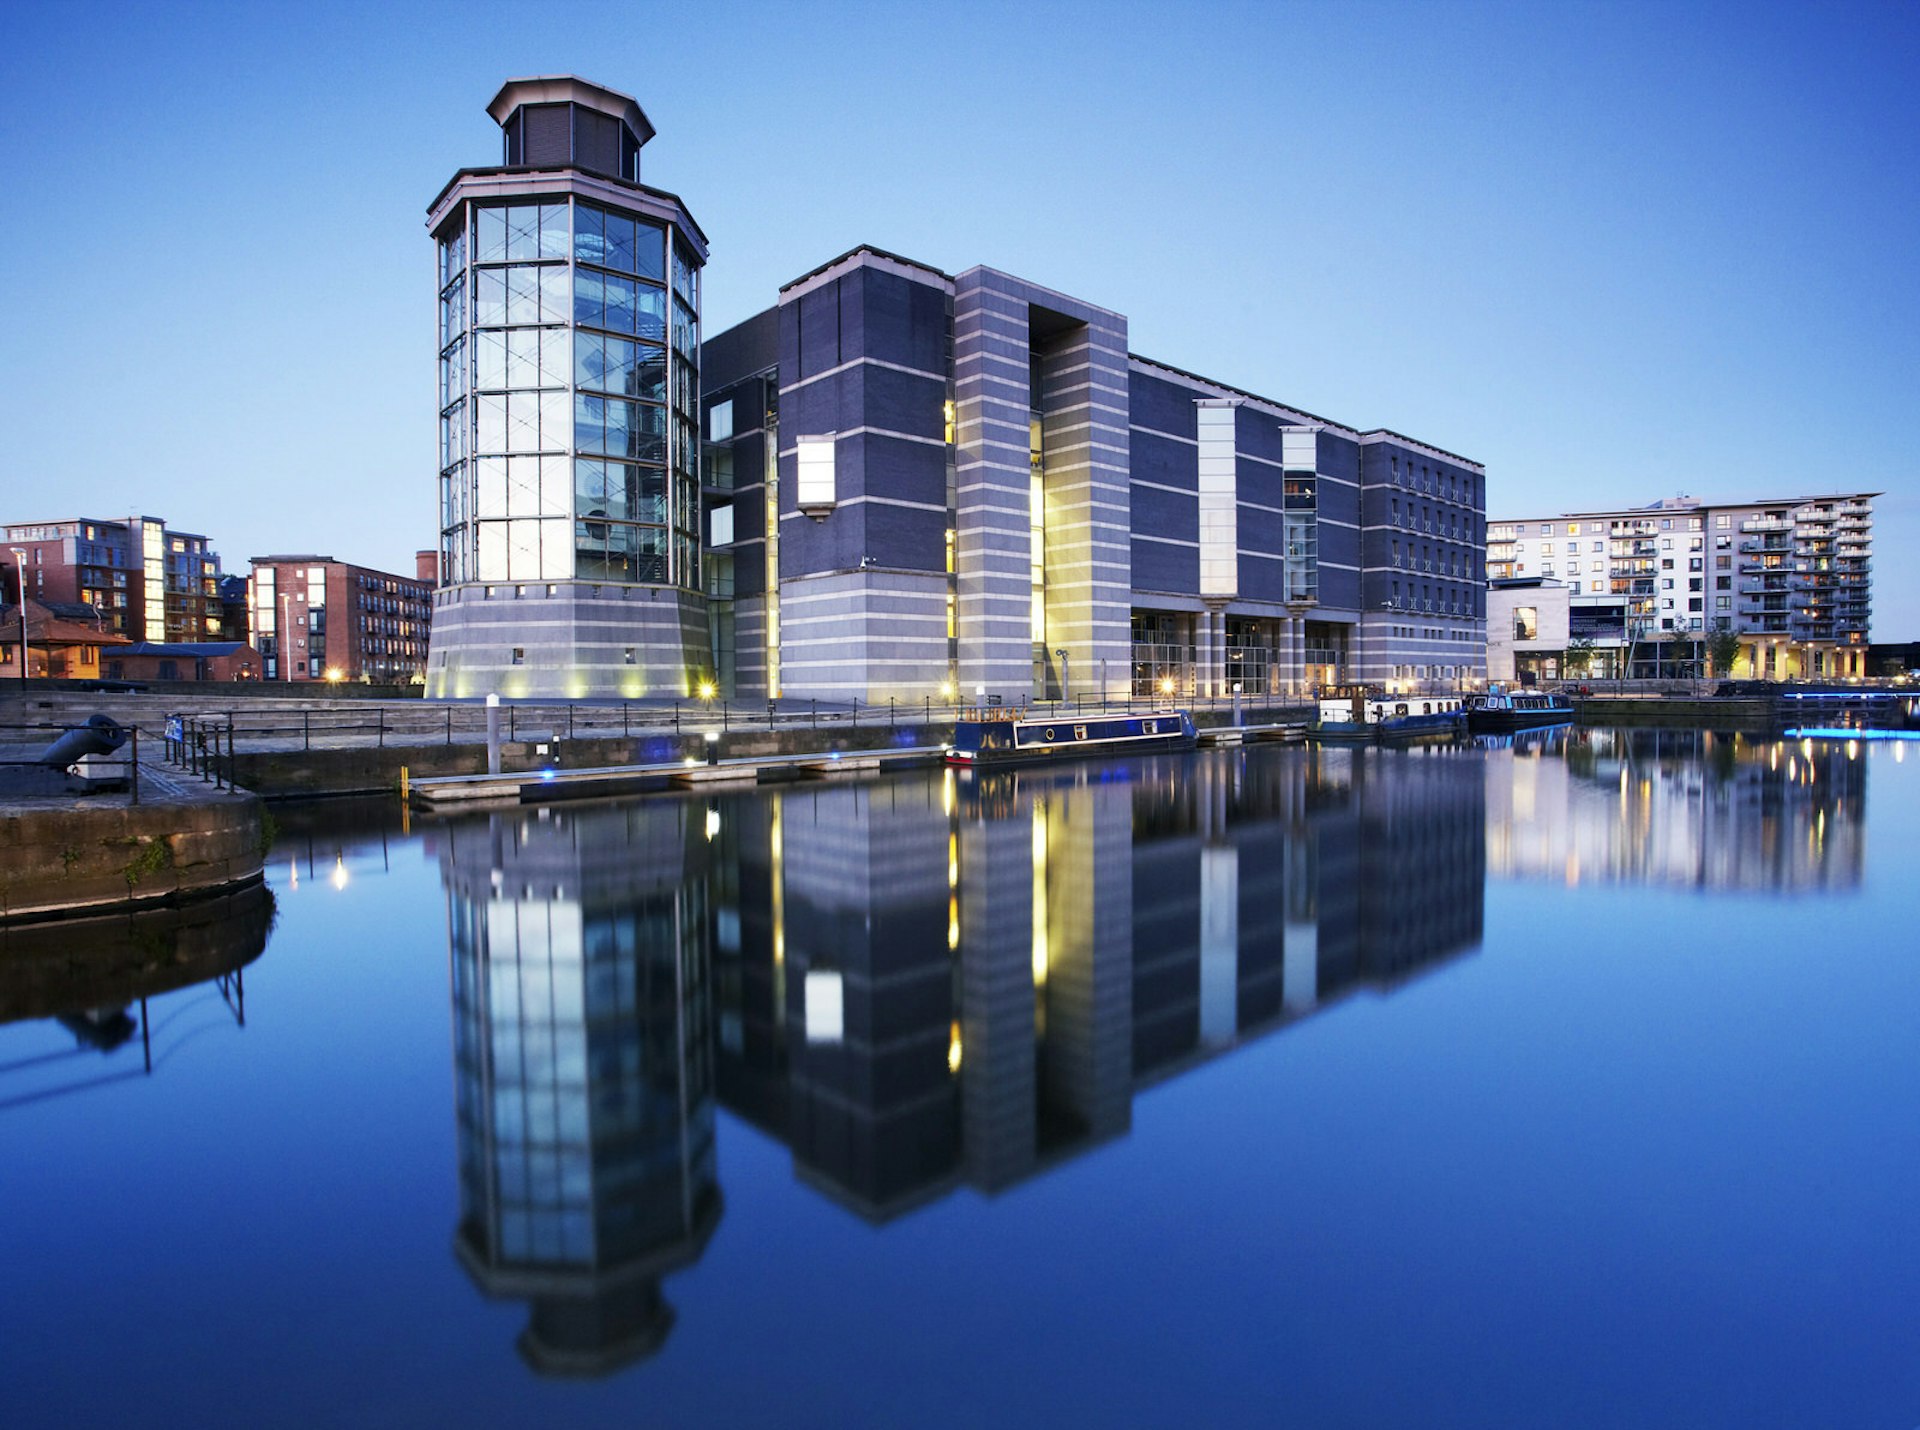 The Royal Armouries museum sits on the banks of the River Aire © Allan Baxter / Getty Images